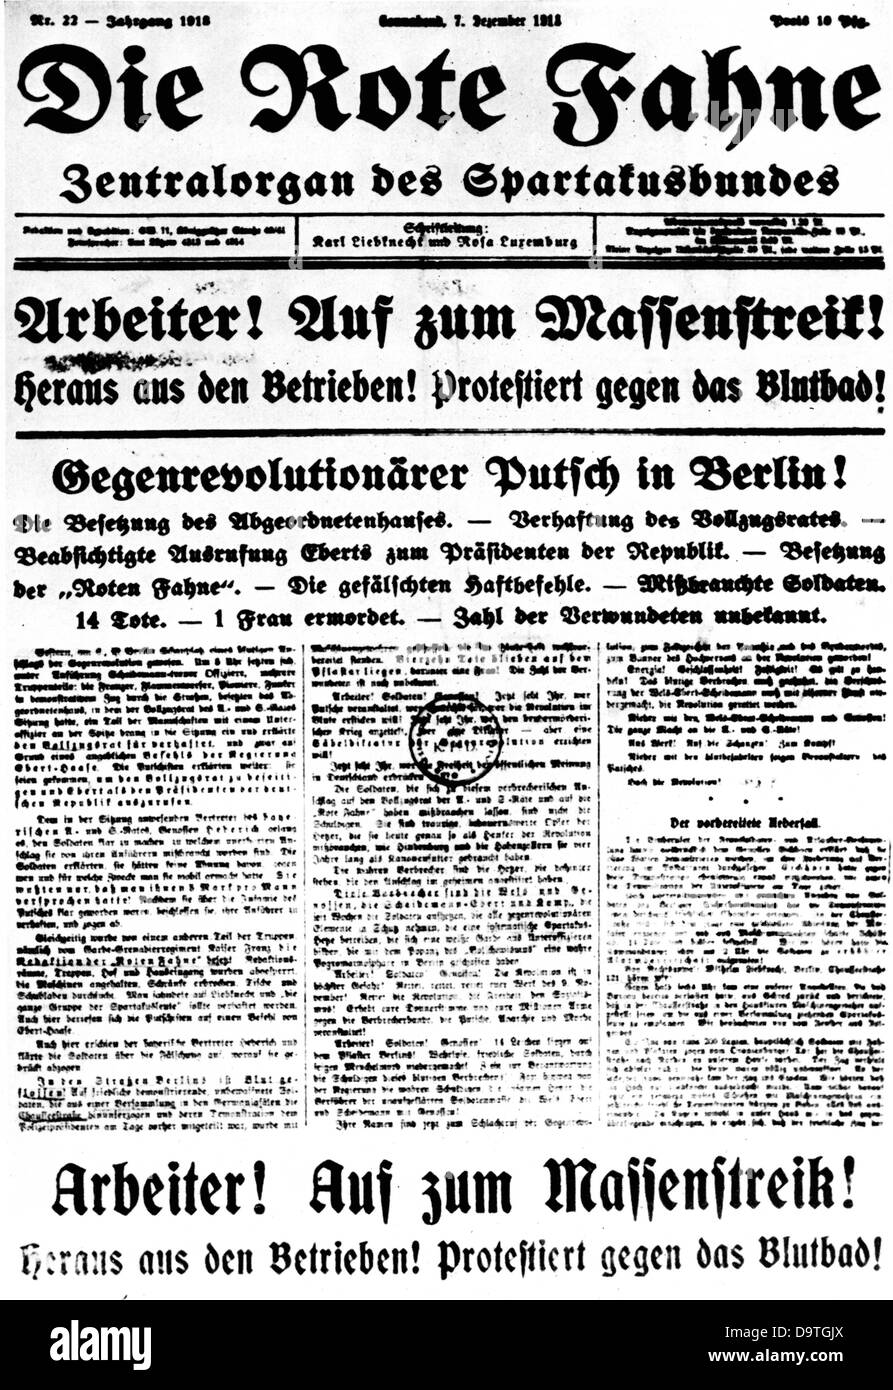 The call for strikes by the Spartacus League in the newspaper 'Die Rote Fahne' ('The red flag') published on 7 December 1918. Fotoarchiv für Zeitgeschichte Stock Photo